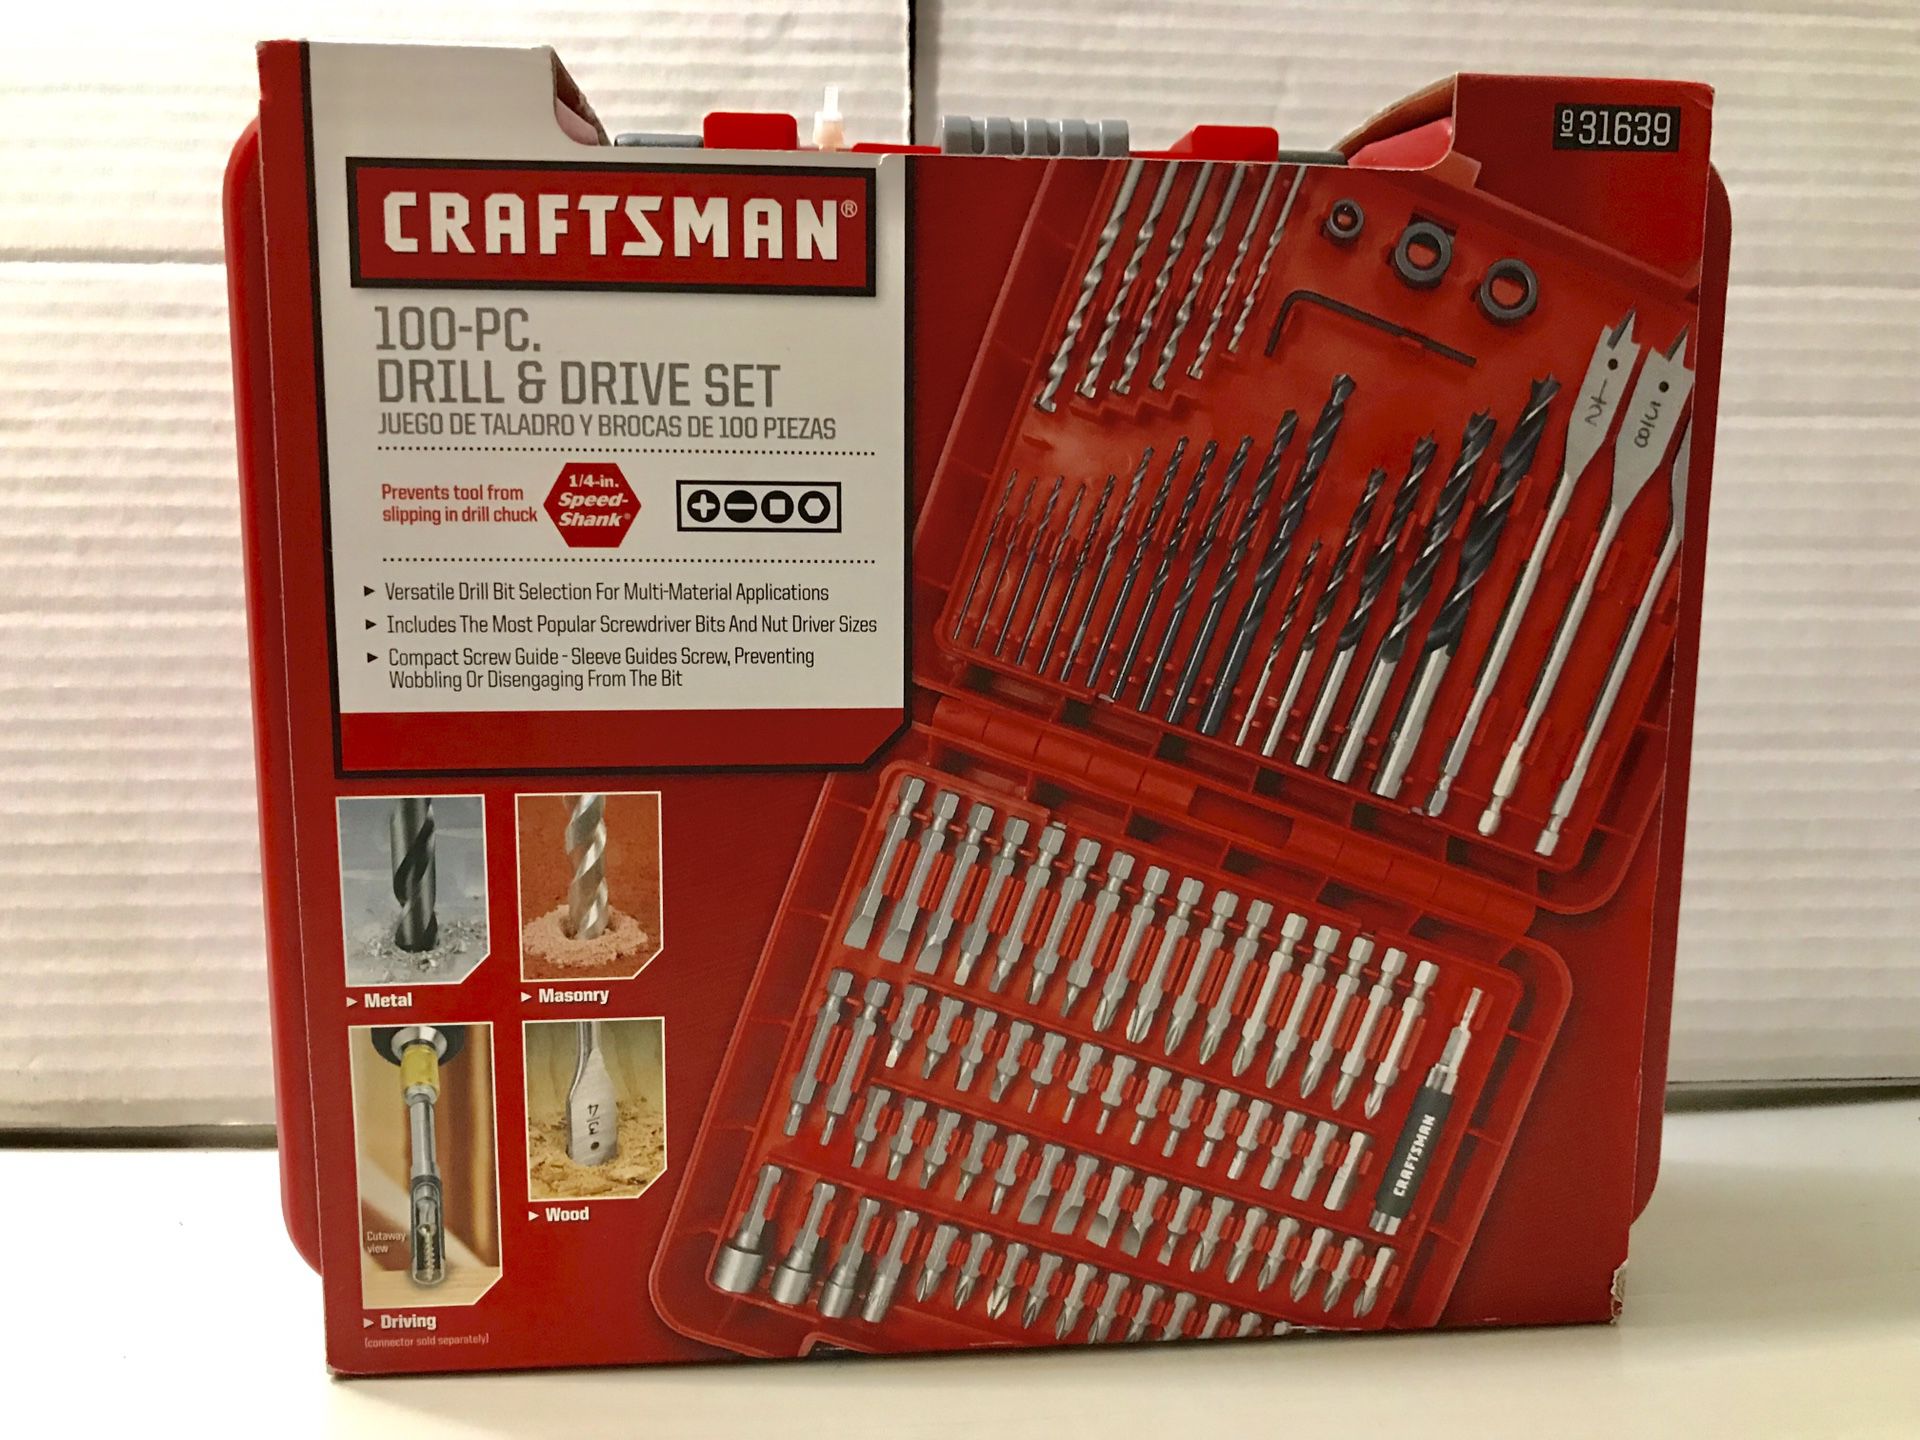 Craftsman 100 PC drill & drive set - Best gift for Christmas